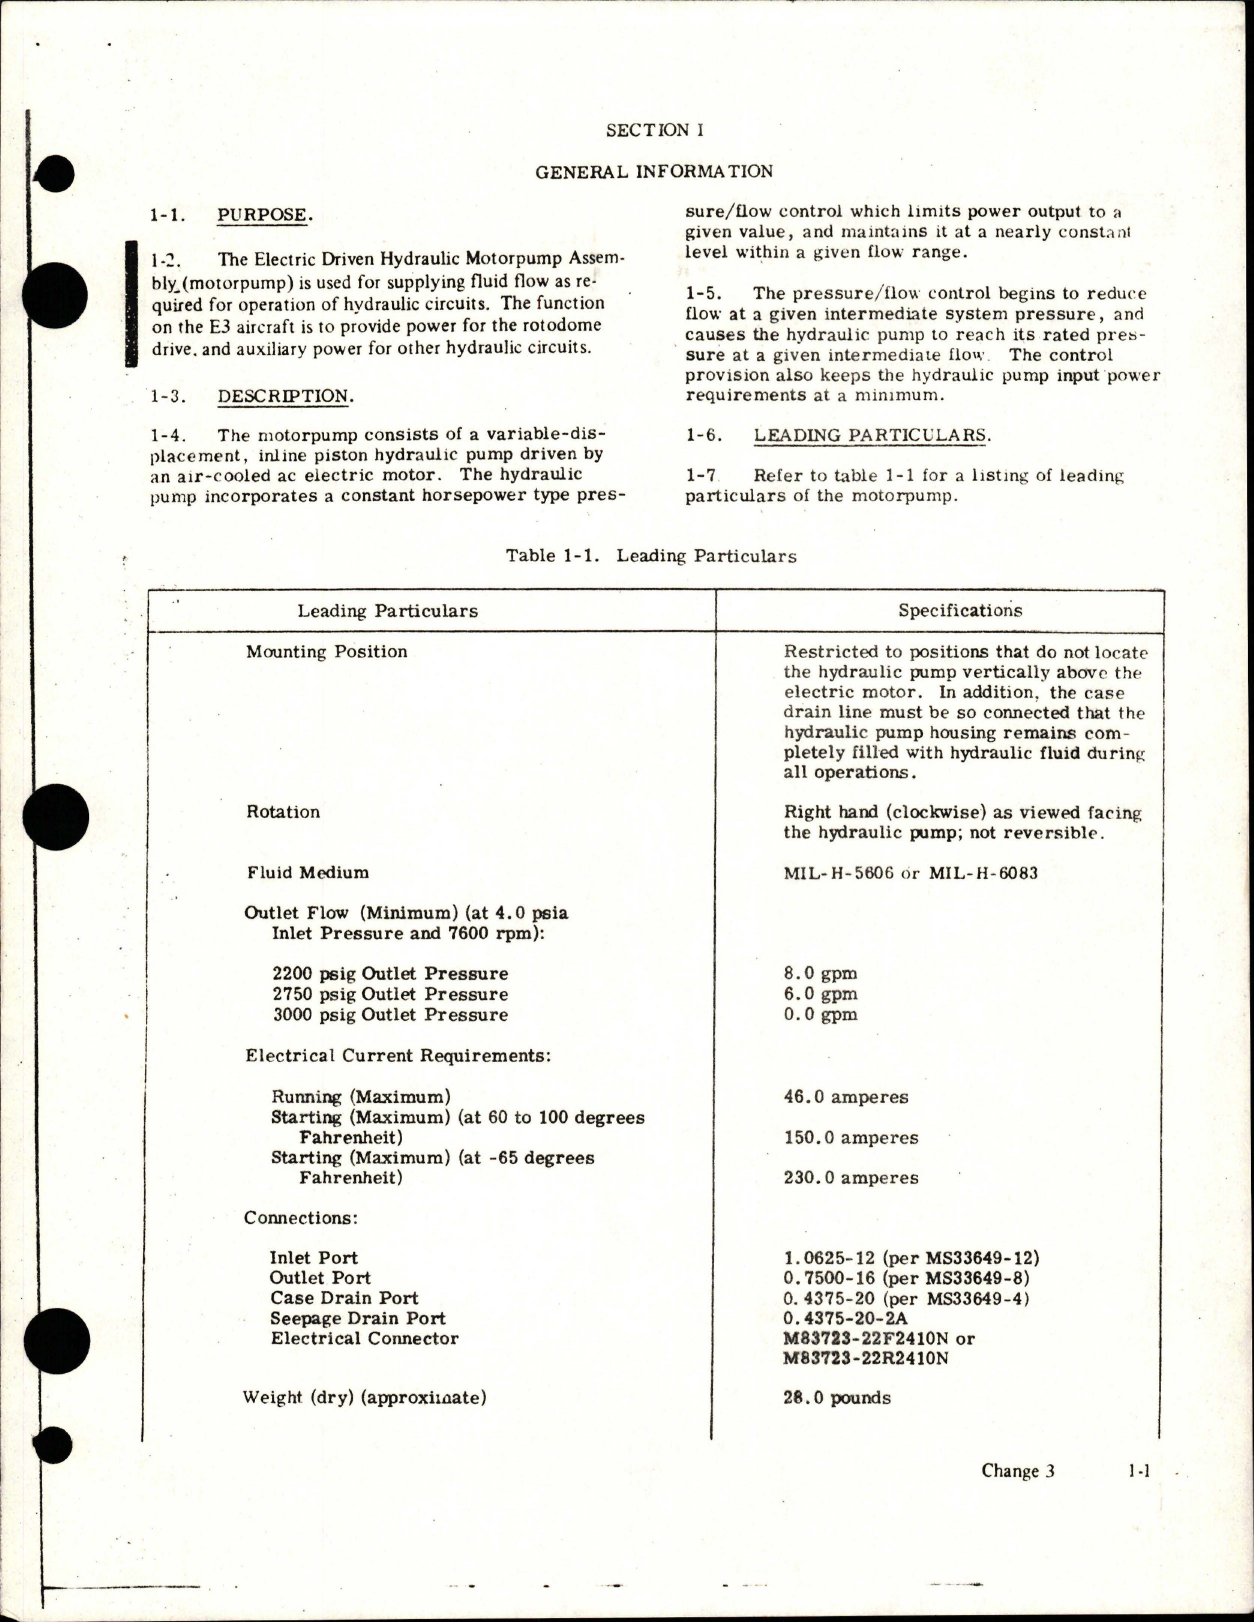 Sample page 9 from AirCorps Library document: Overhaul Instructions with Illustrated Parts for Electric Driven Hydraulic Motorpump Assembly - Part 378004 - Model MPEV3-032-4